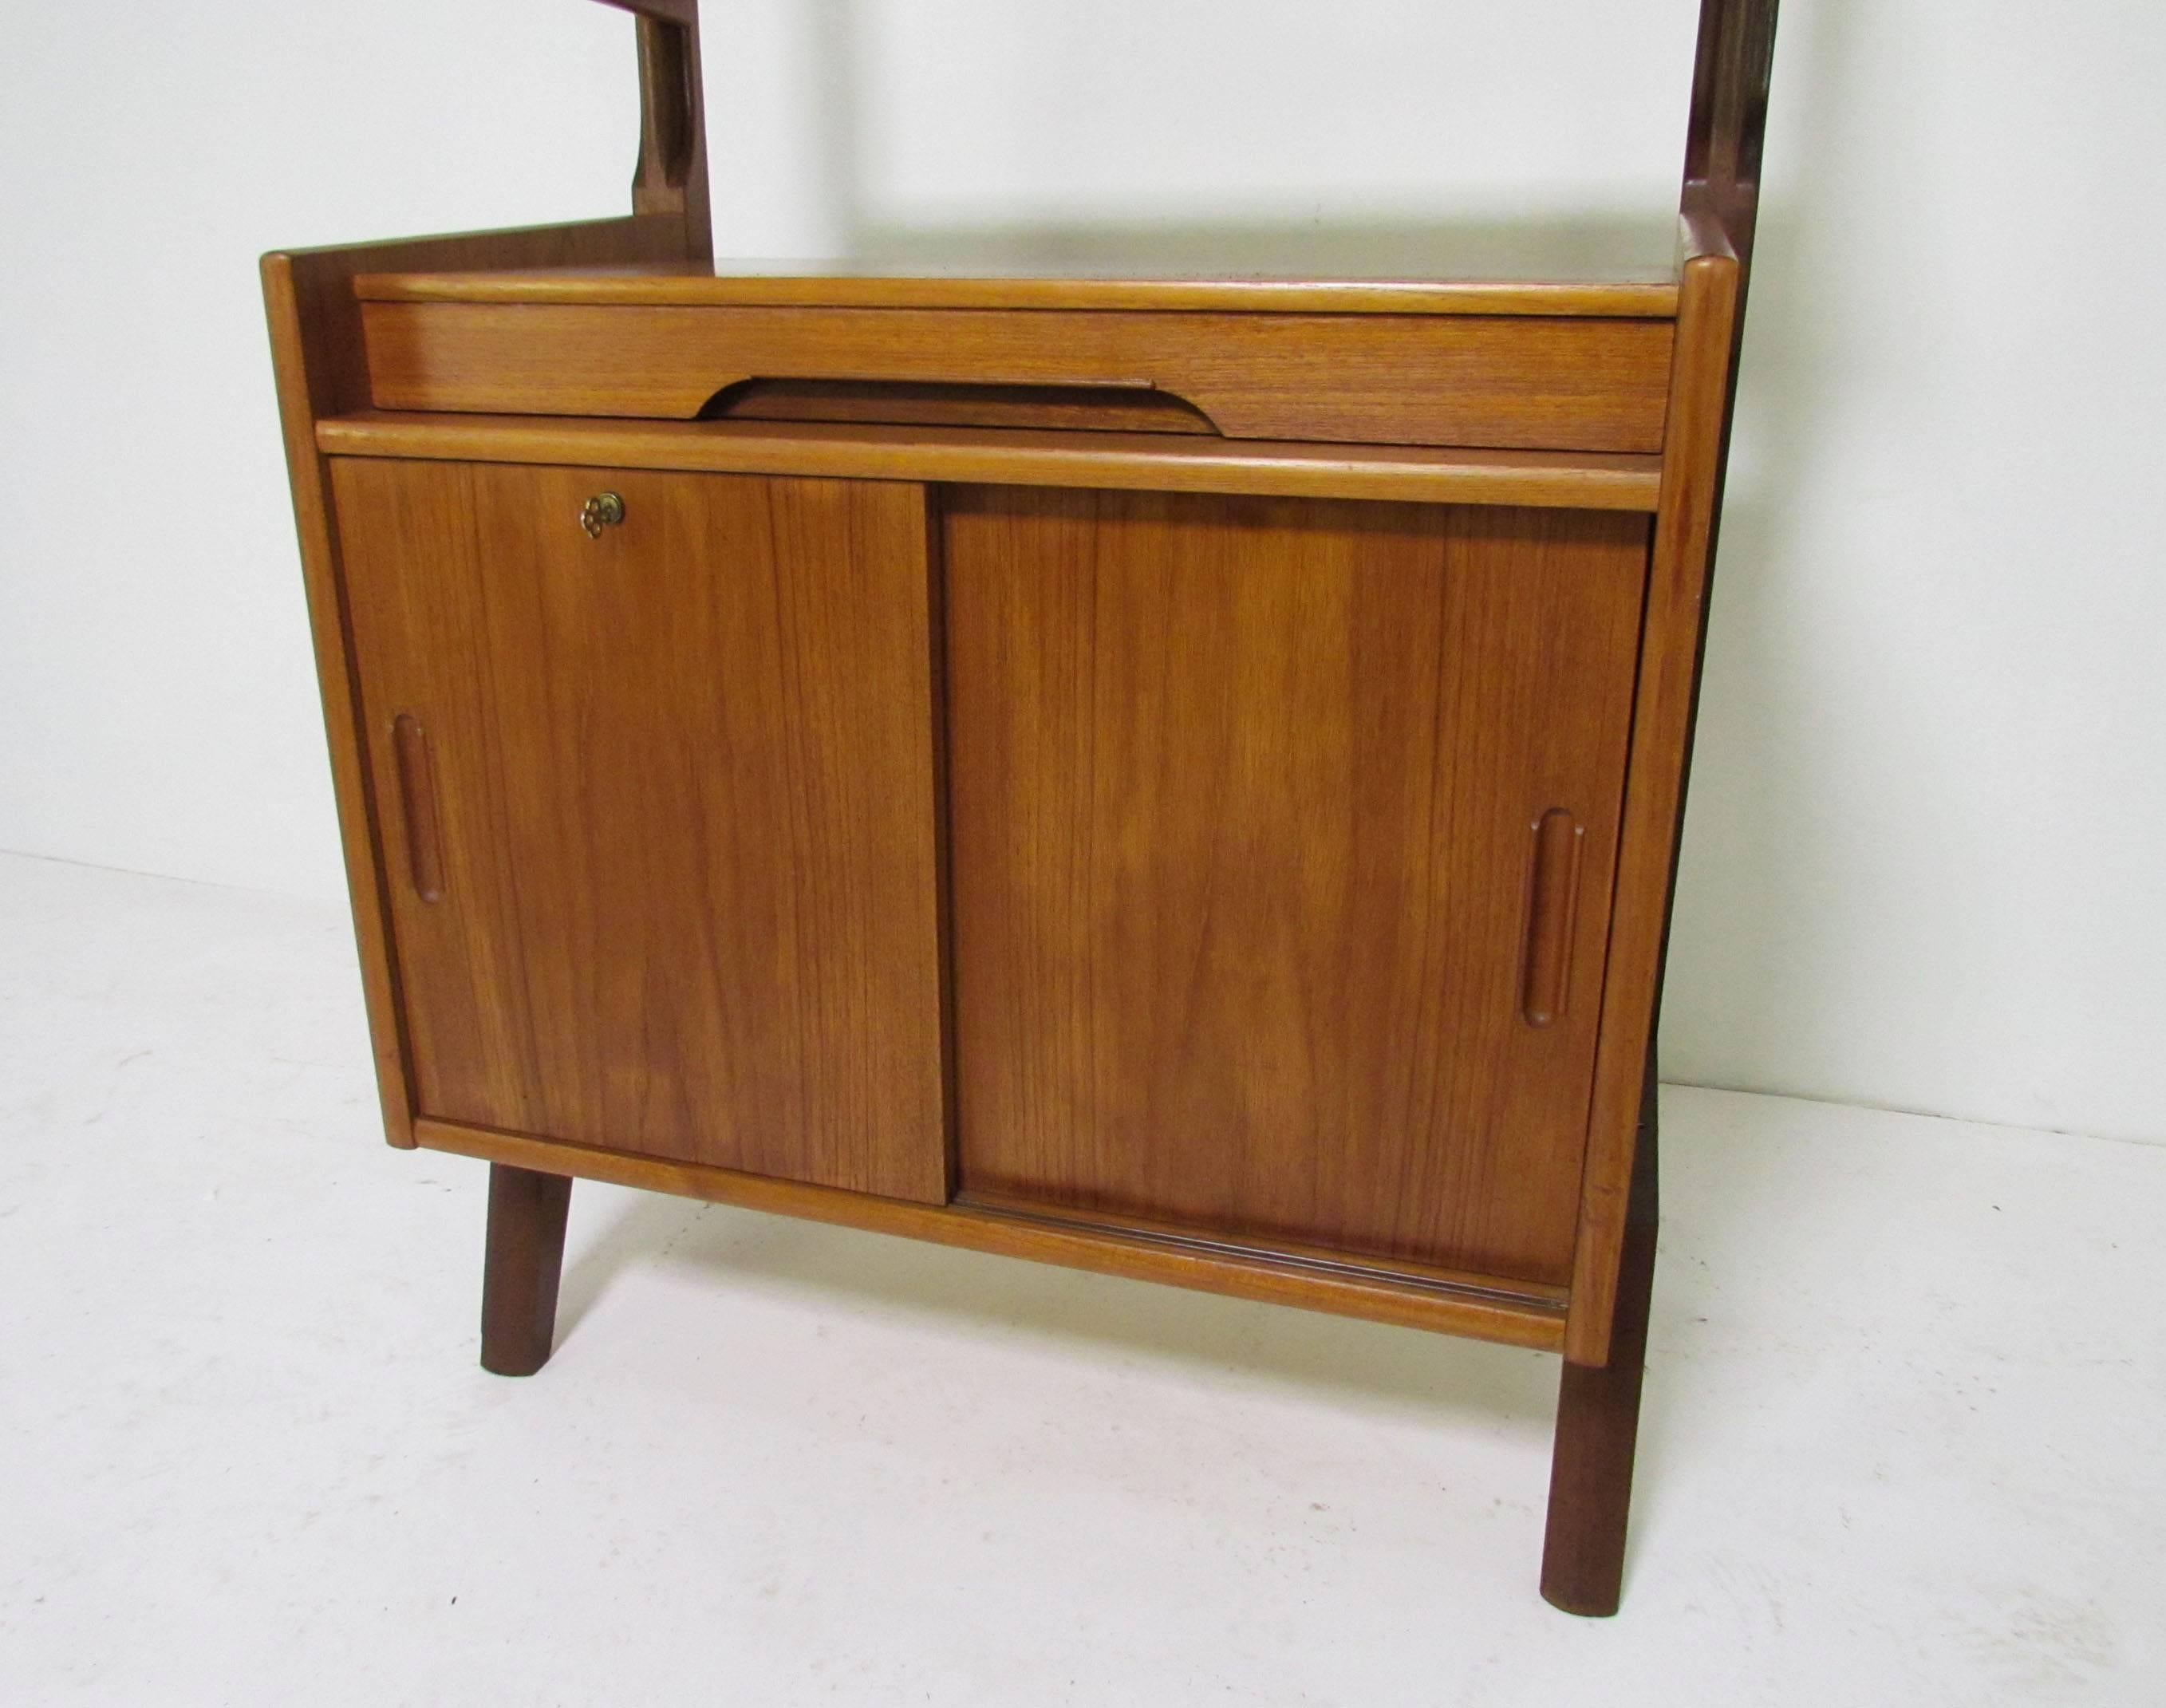 Mid-20th Century Danish Teak Free Standing Wall Shelving Book Case Unit in the Manner of Cado